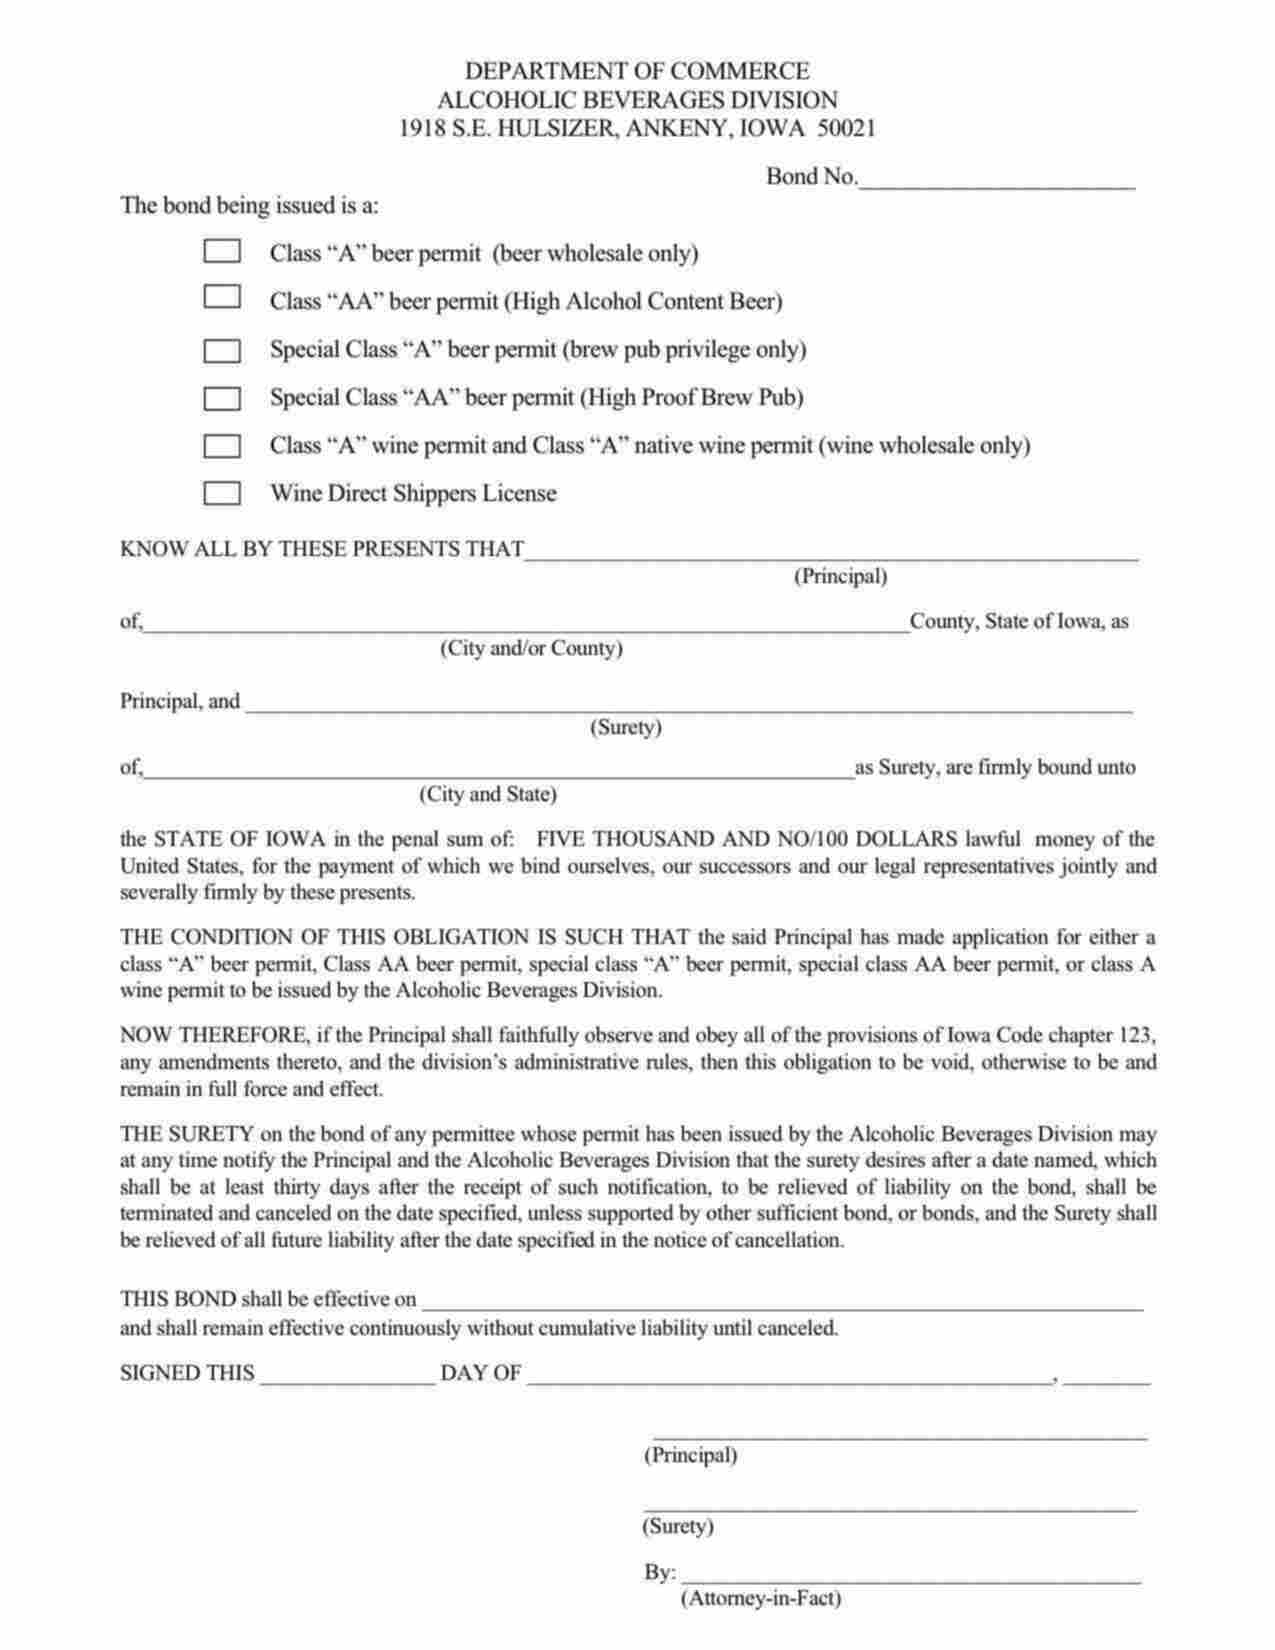 Iowa Class AA Beer Permit (High Alcohol Content Beer) Bond Form